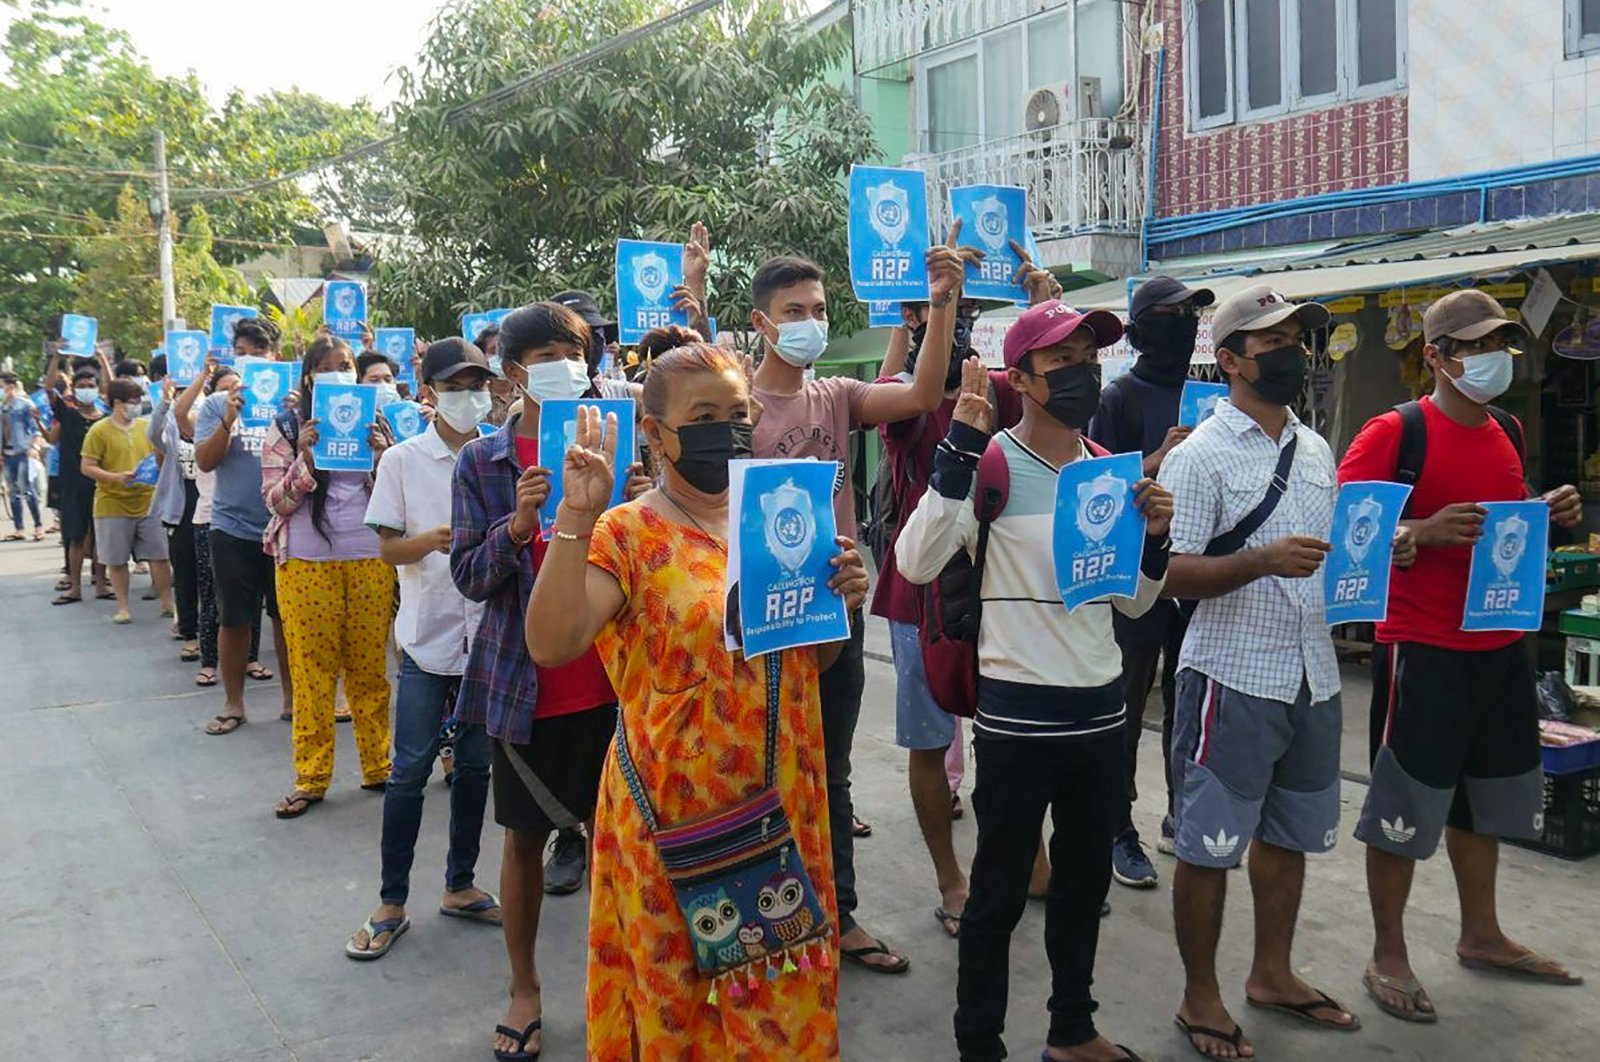 Protesters hold signs relating to "R2P," or the "Responsibility to Protect" principle that the international community should take action against a state that has failed to protect its population, in Yangon's Thaketa township, Myanmar, April 1, 2021. (AFP Photo)